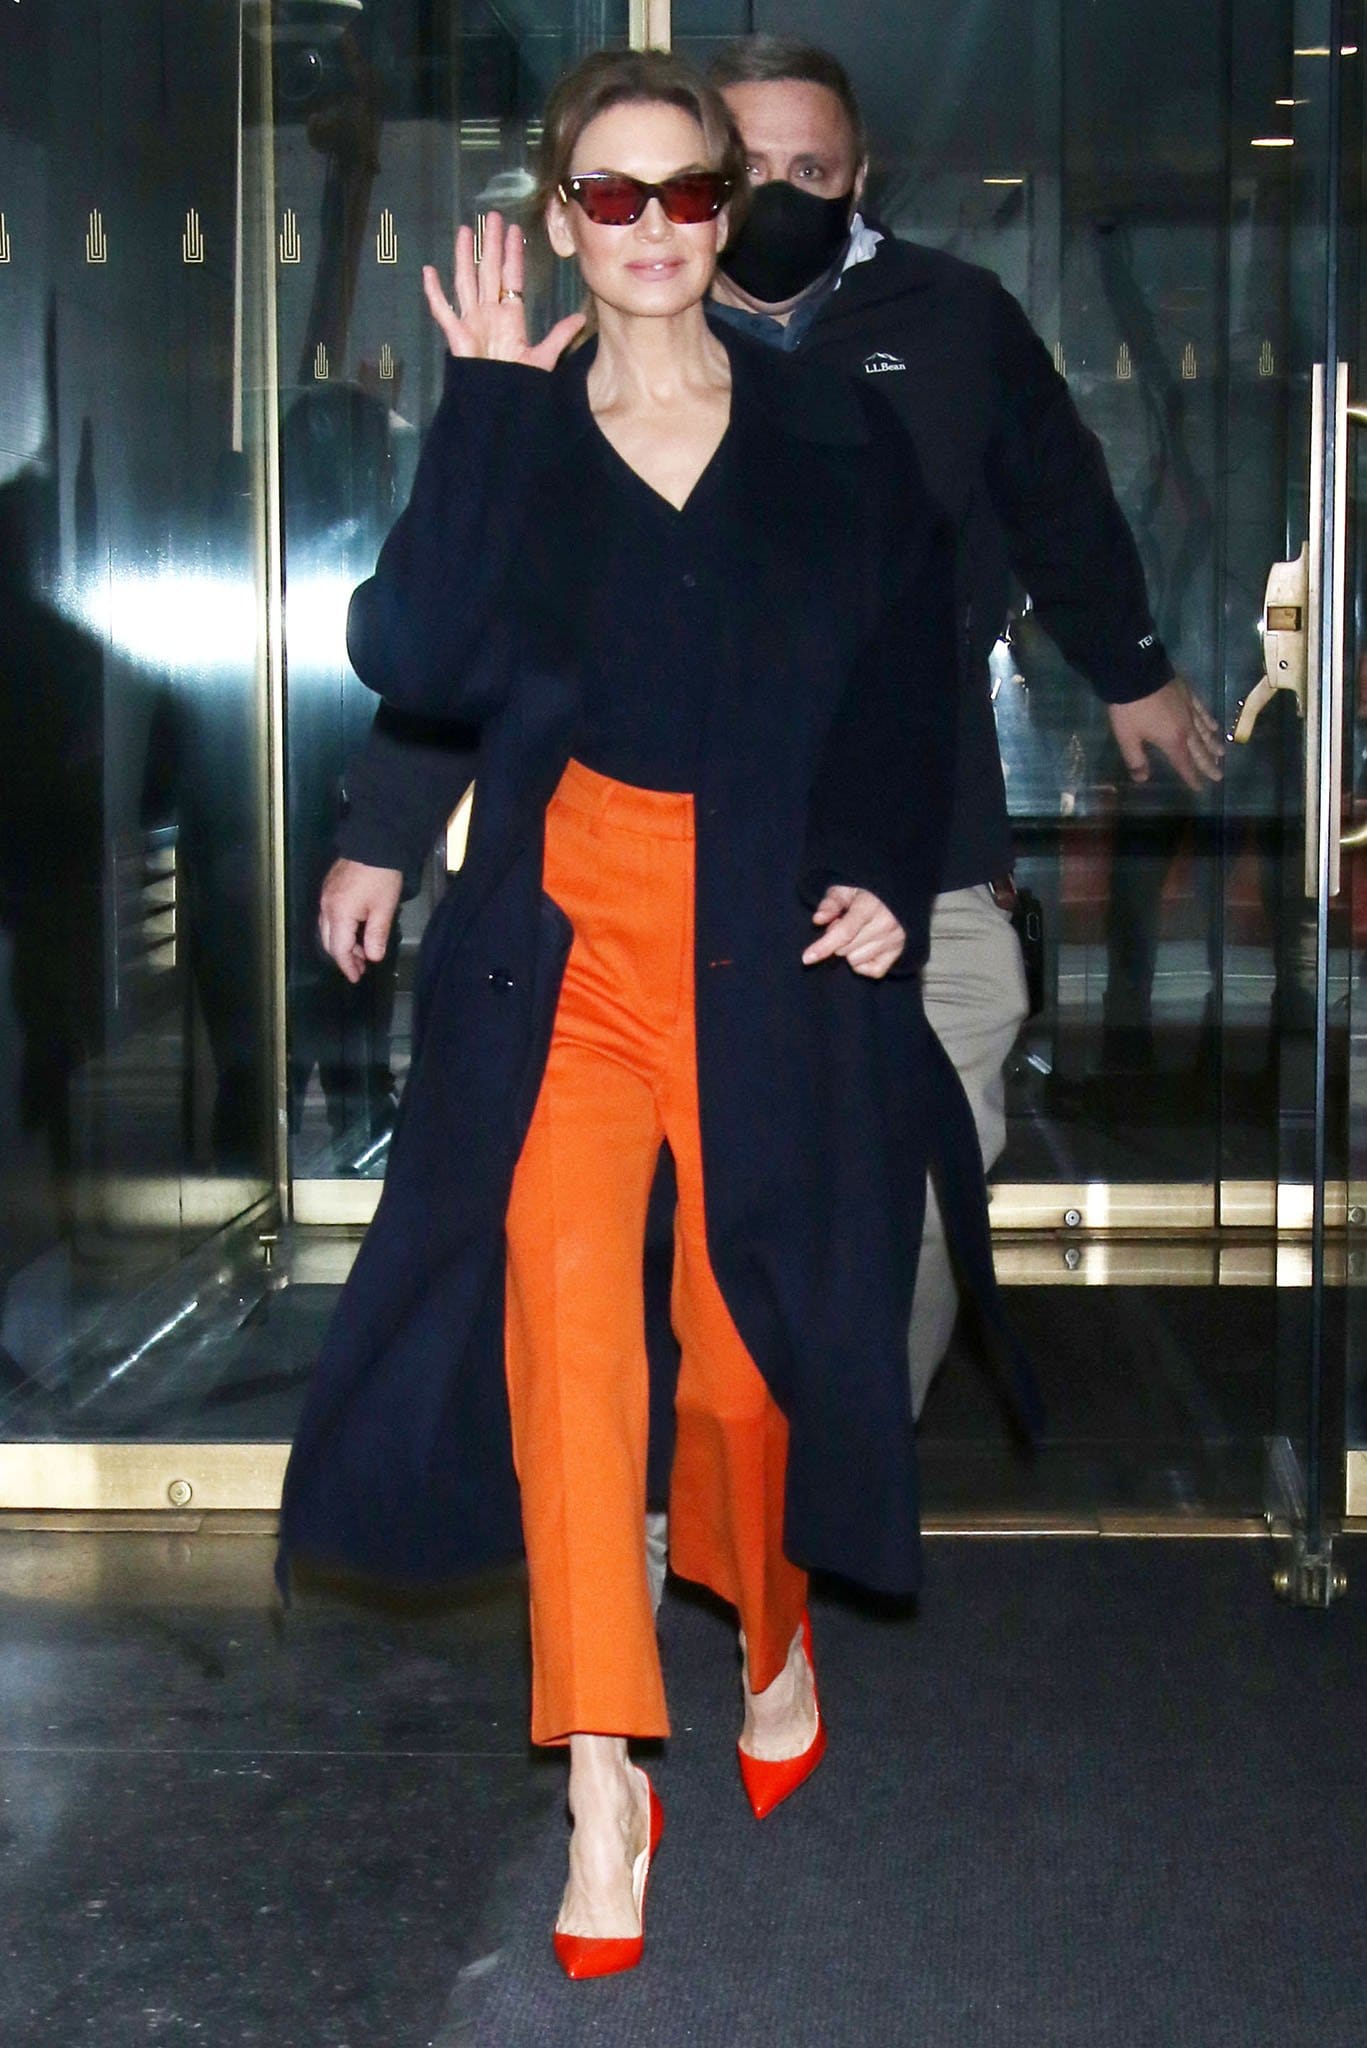 Renée Zellweger in Max Mara sweater, orange pants, and black coat ahead of her appearance on the Today Show